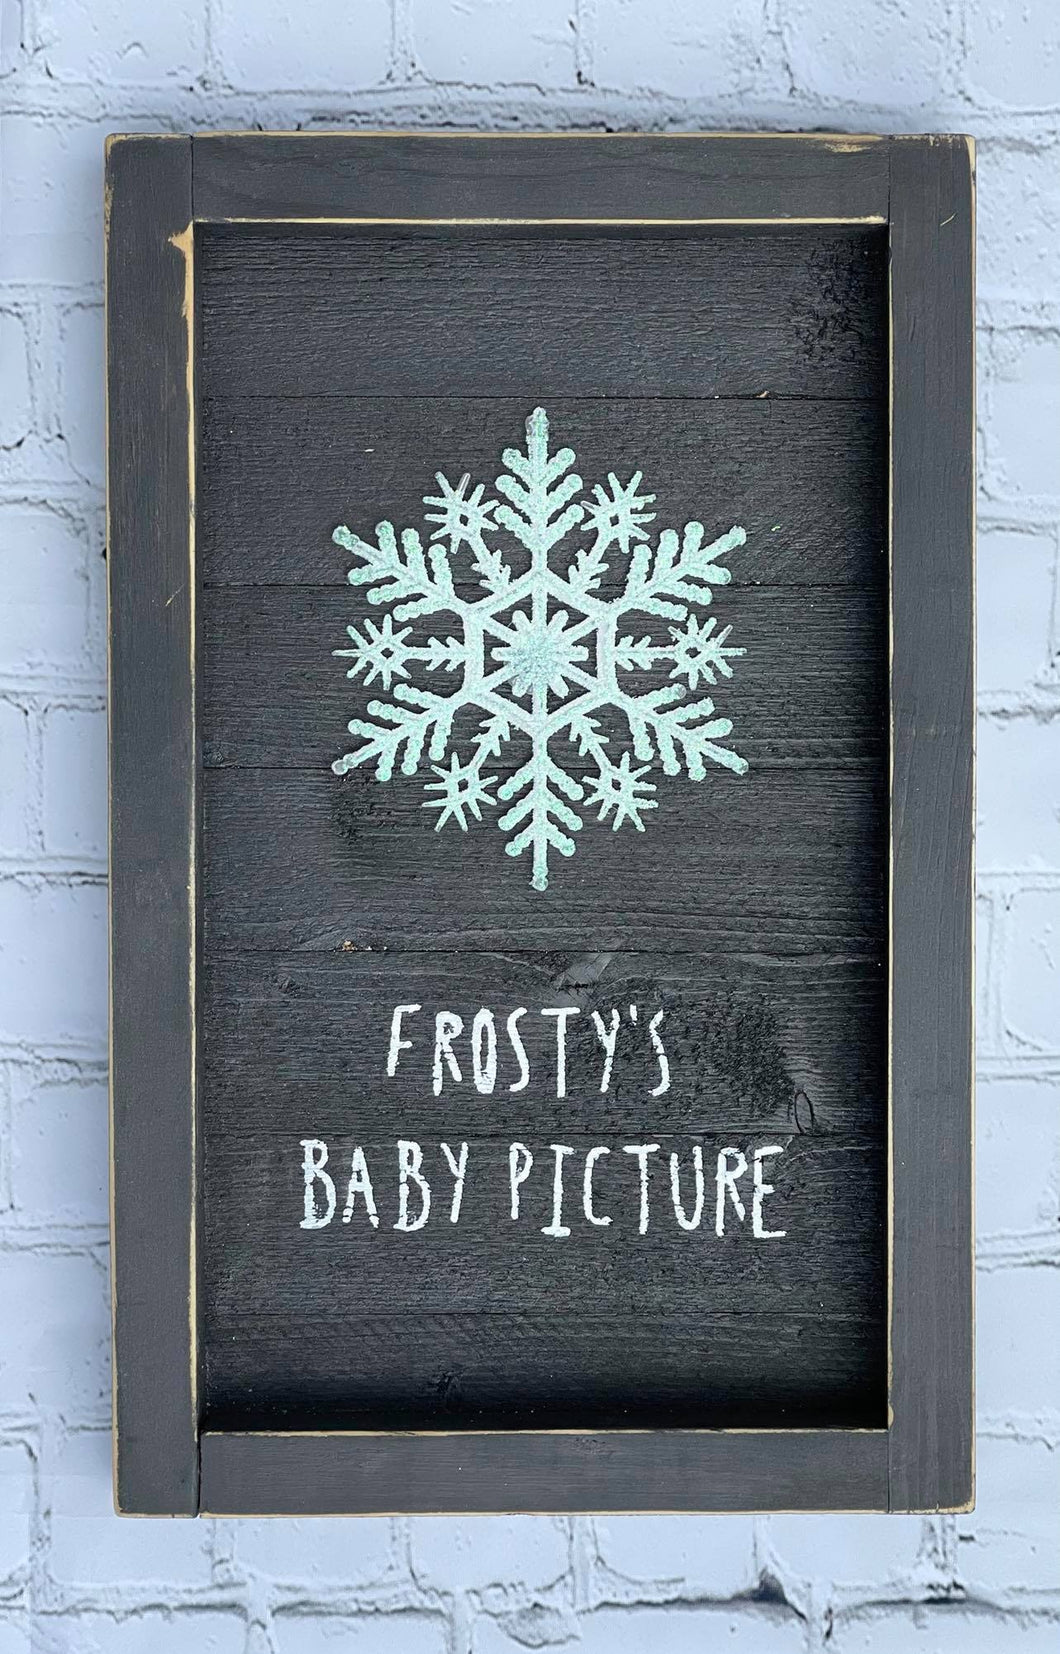 Frosty’s Baby Picture